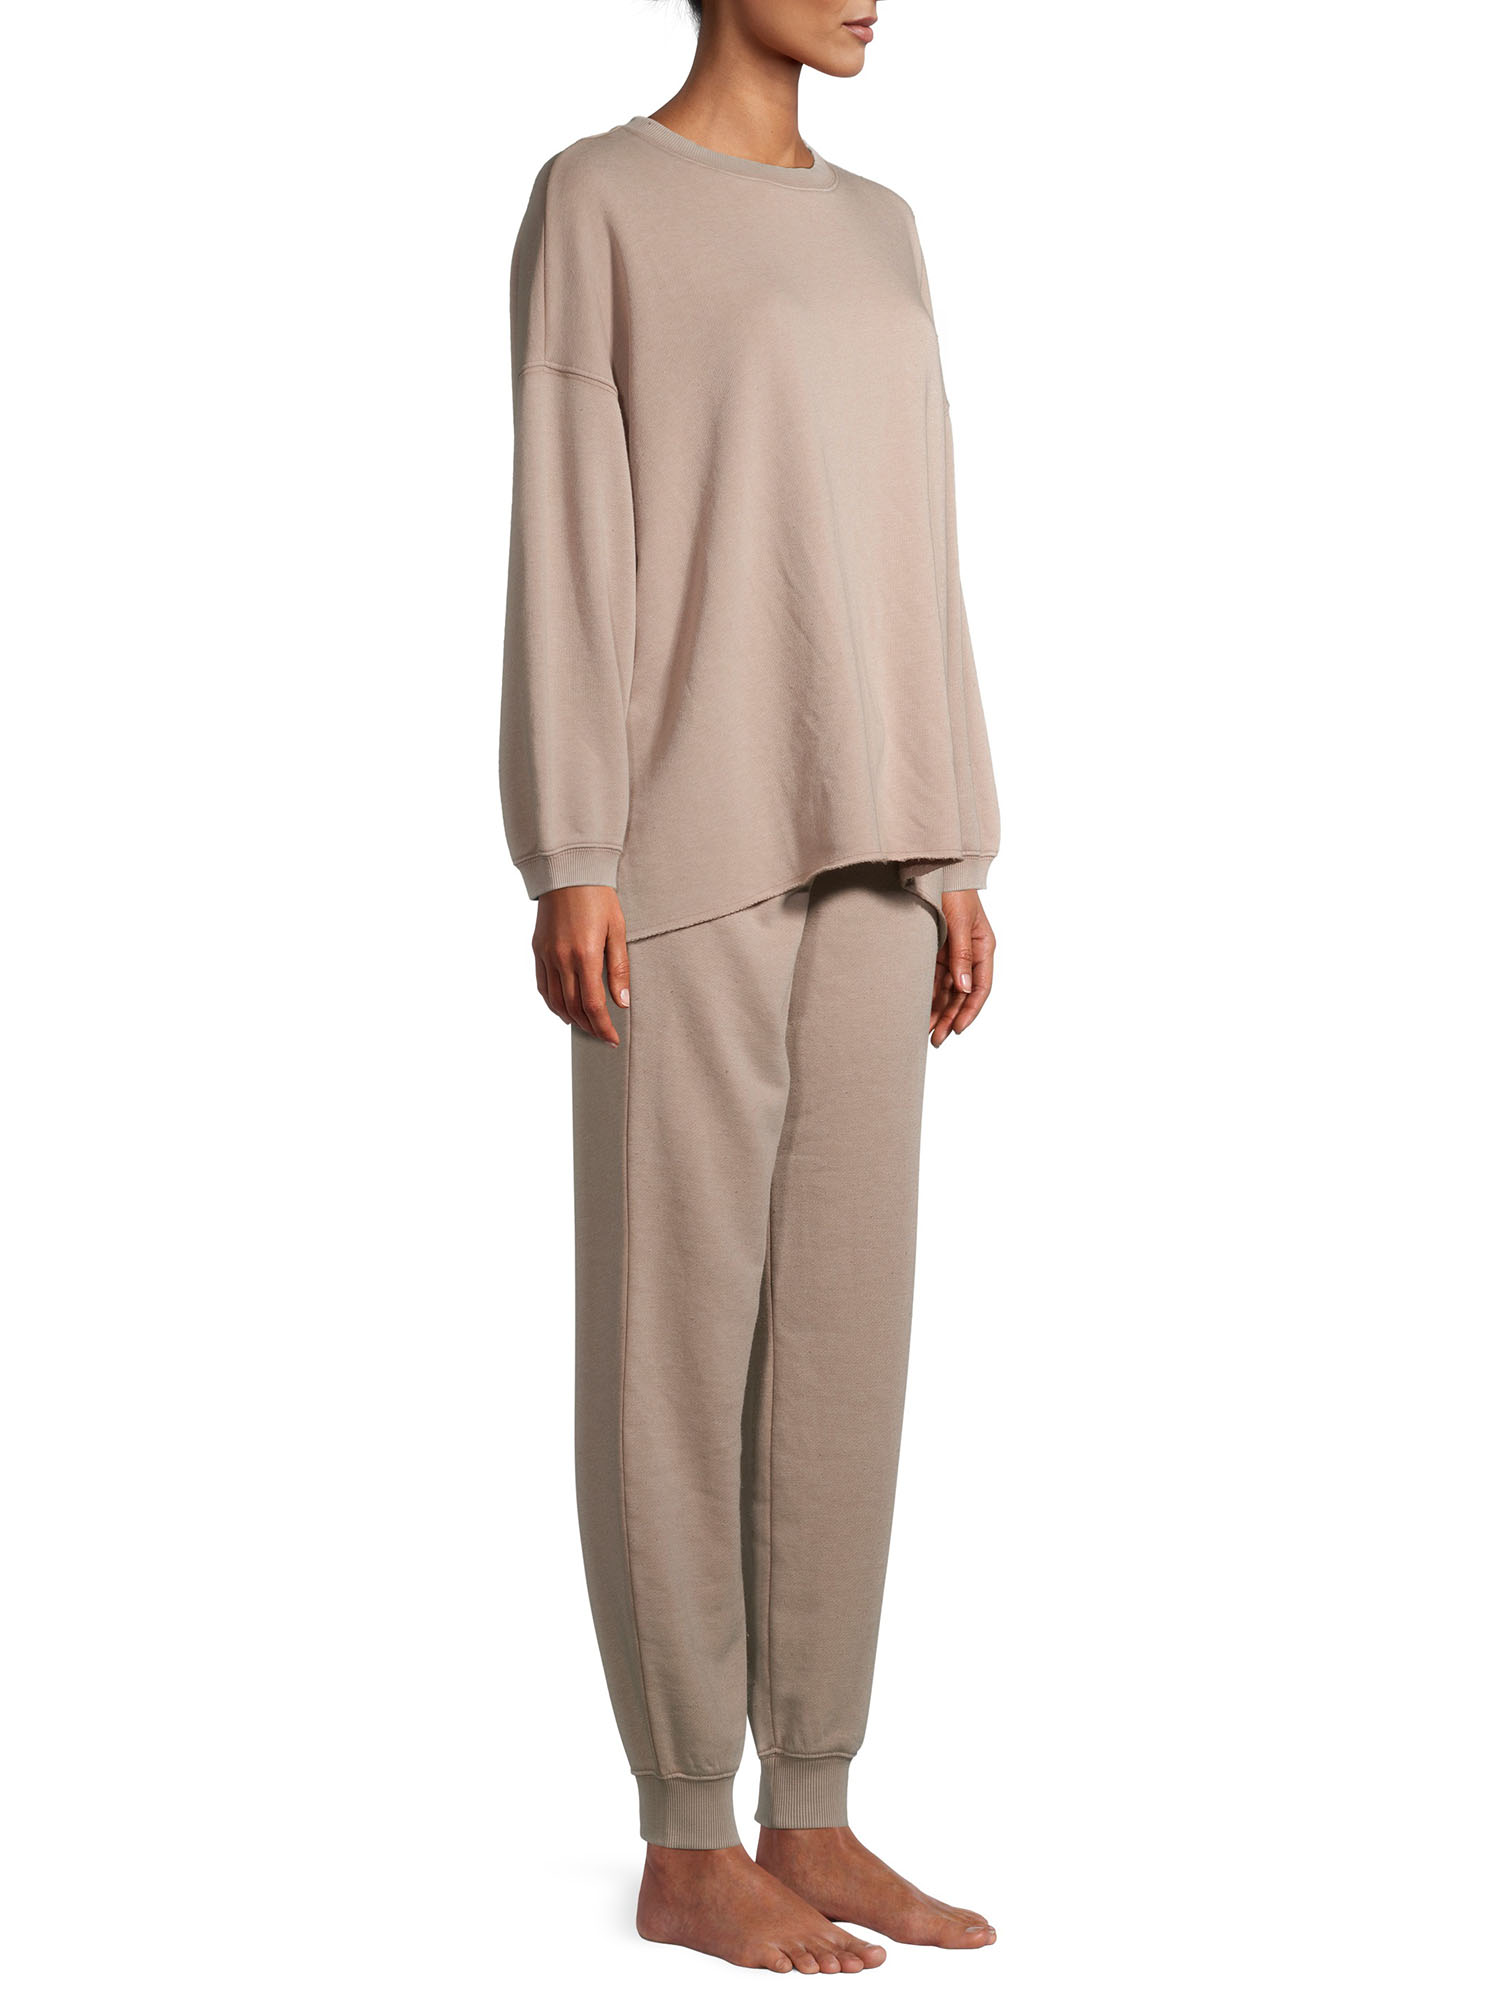 Secret Treasures Women's and Women's Plus Oversized Long Sleeve Top and Jogger Lounge Set - image 2 of 6